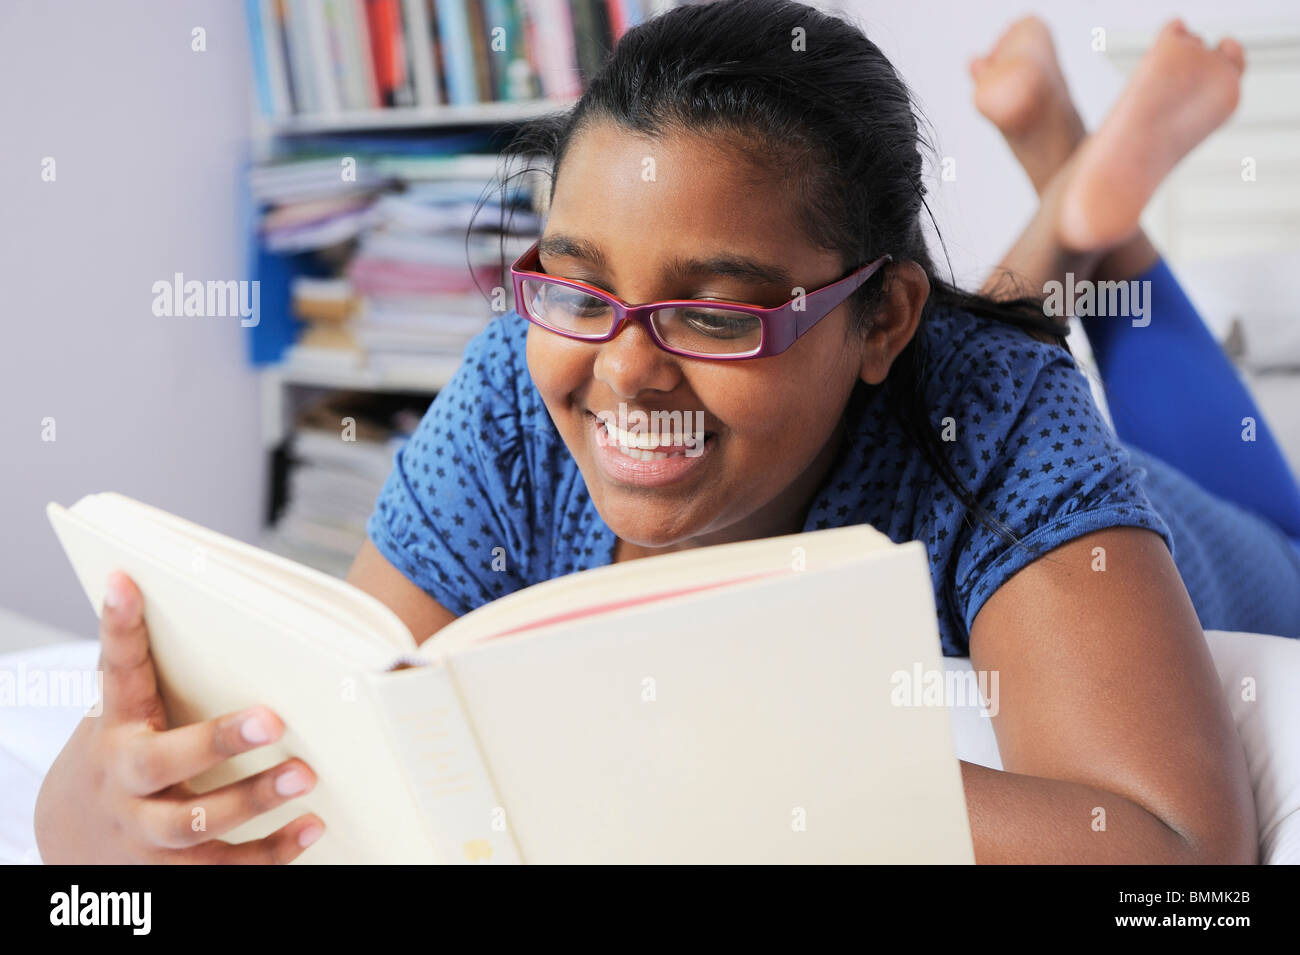 Girl lying on bed, reading book, Cape Town, Western Cape Province, South Africa Stock Photo